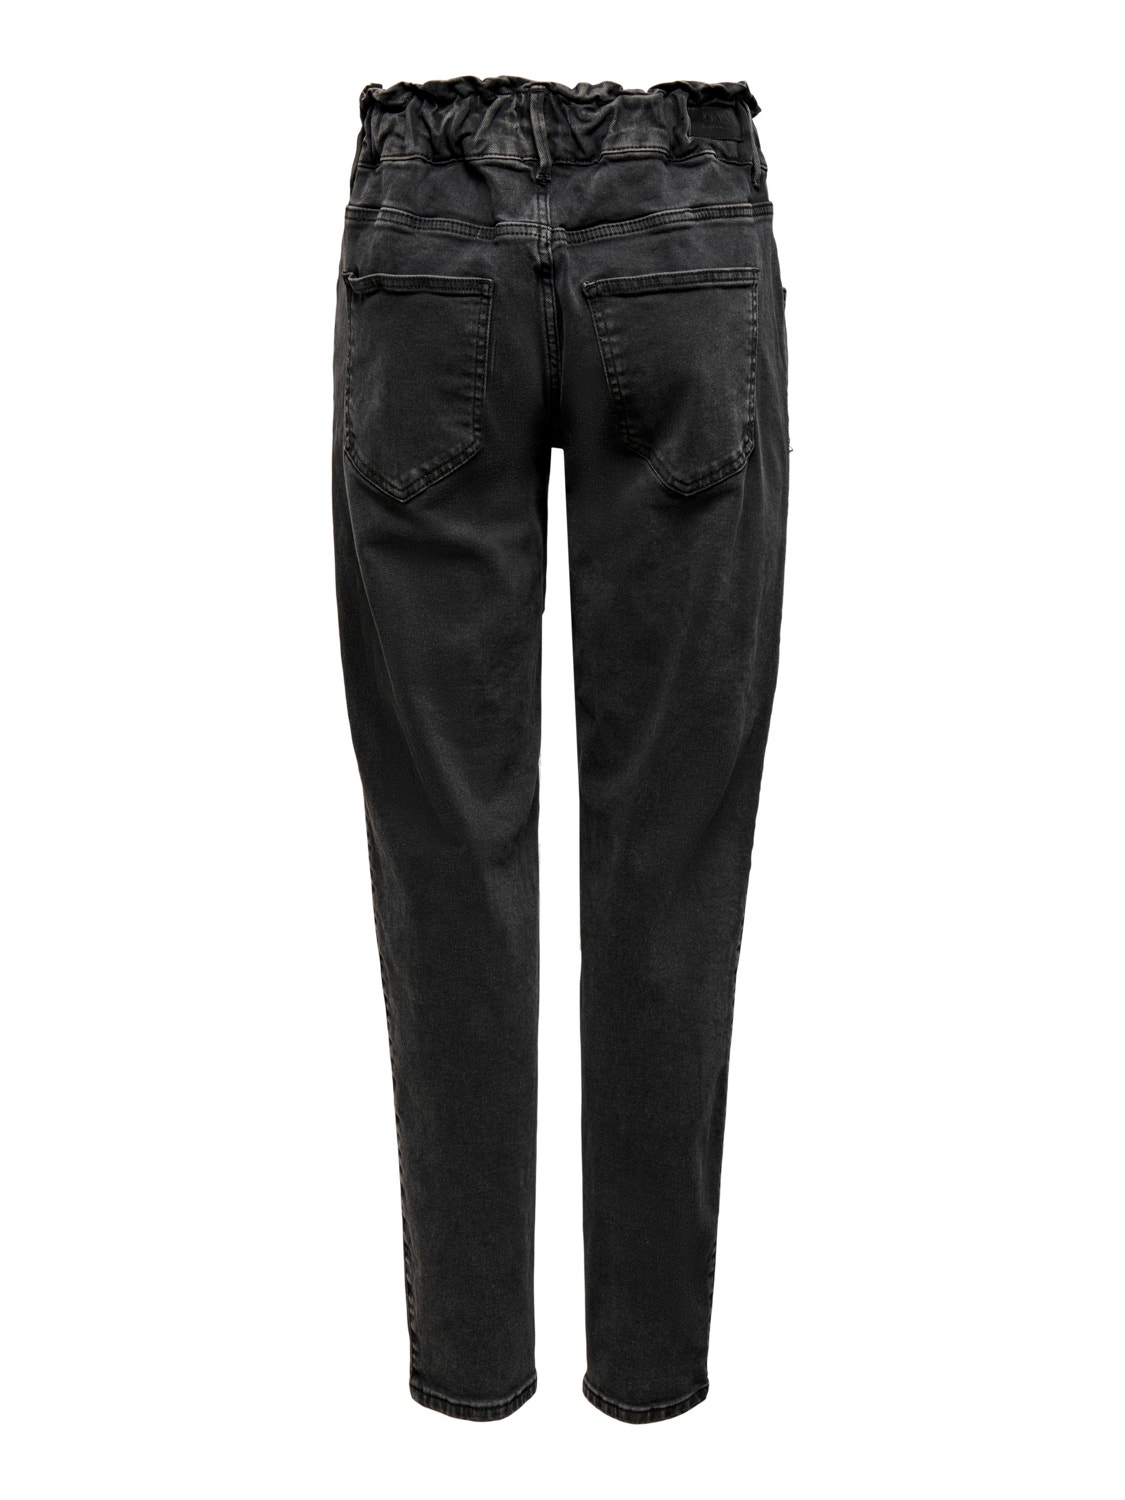 ONLY Skinny Fit Hohe Taille Jeans -Black Denim - 15254799